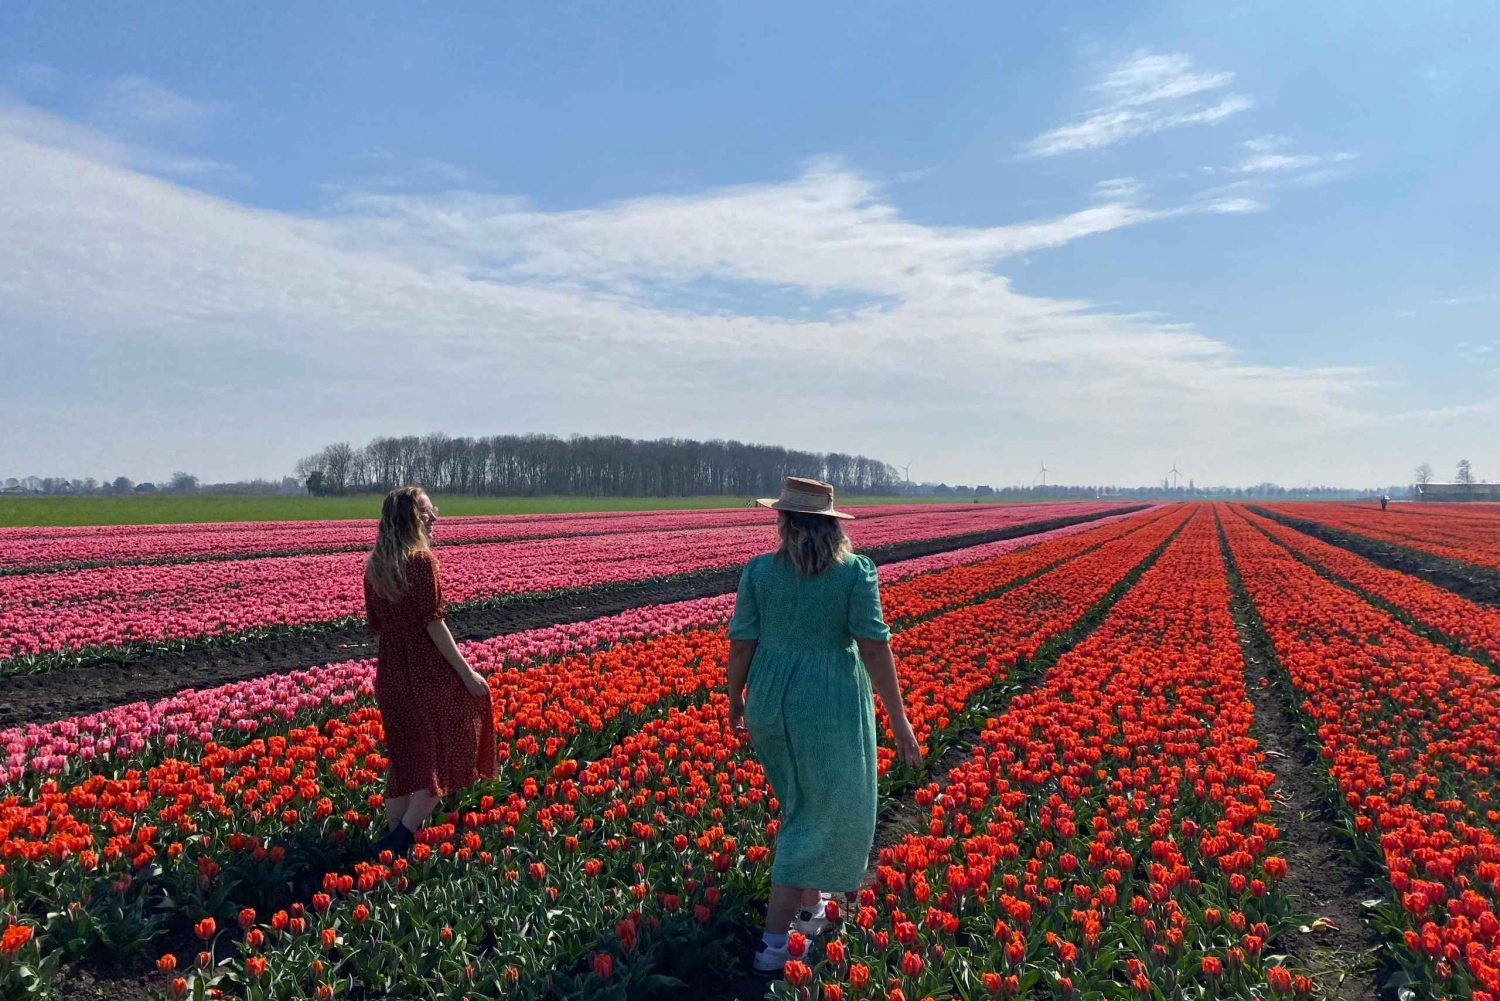 From Amsterdam: Tulip Fields and Windmill Tour with Lunch